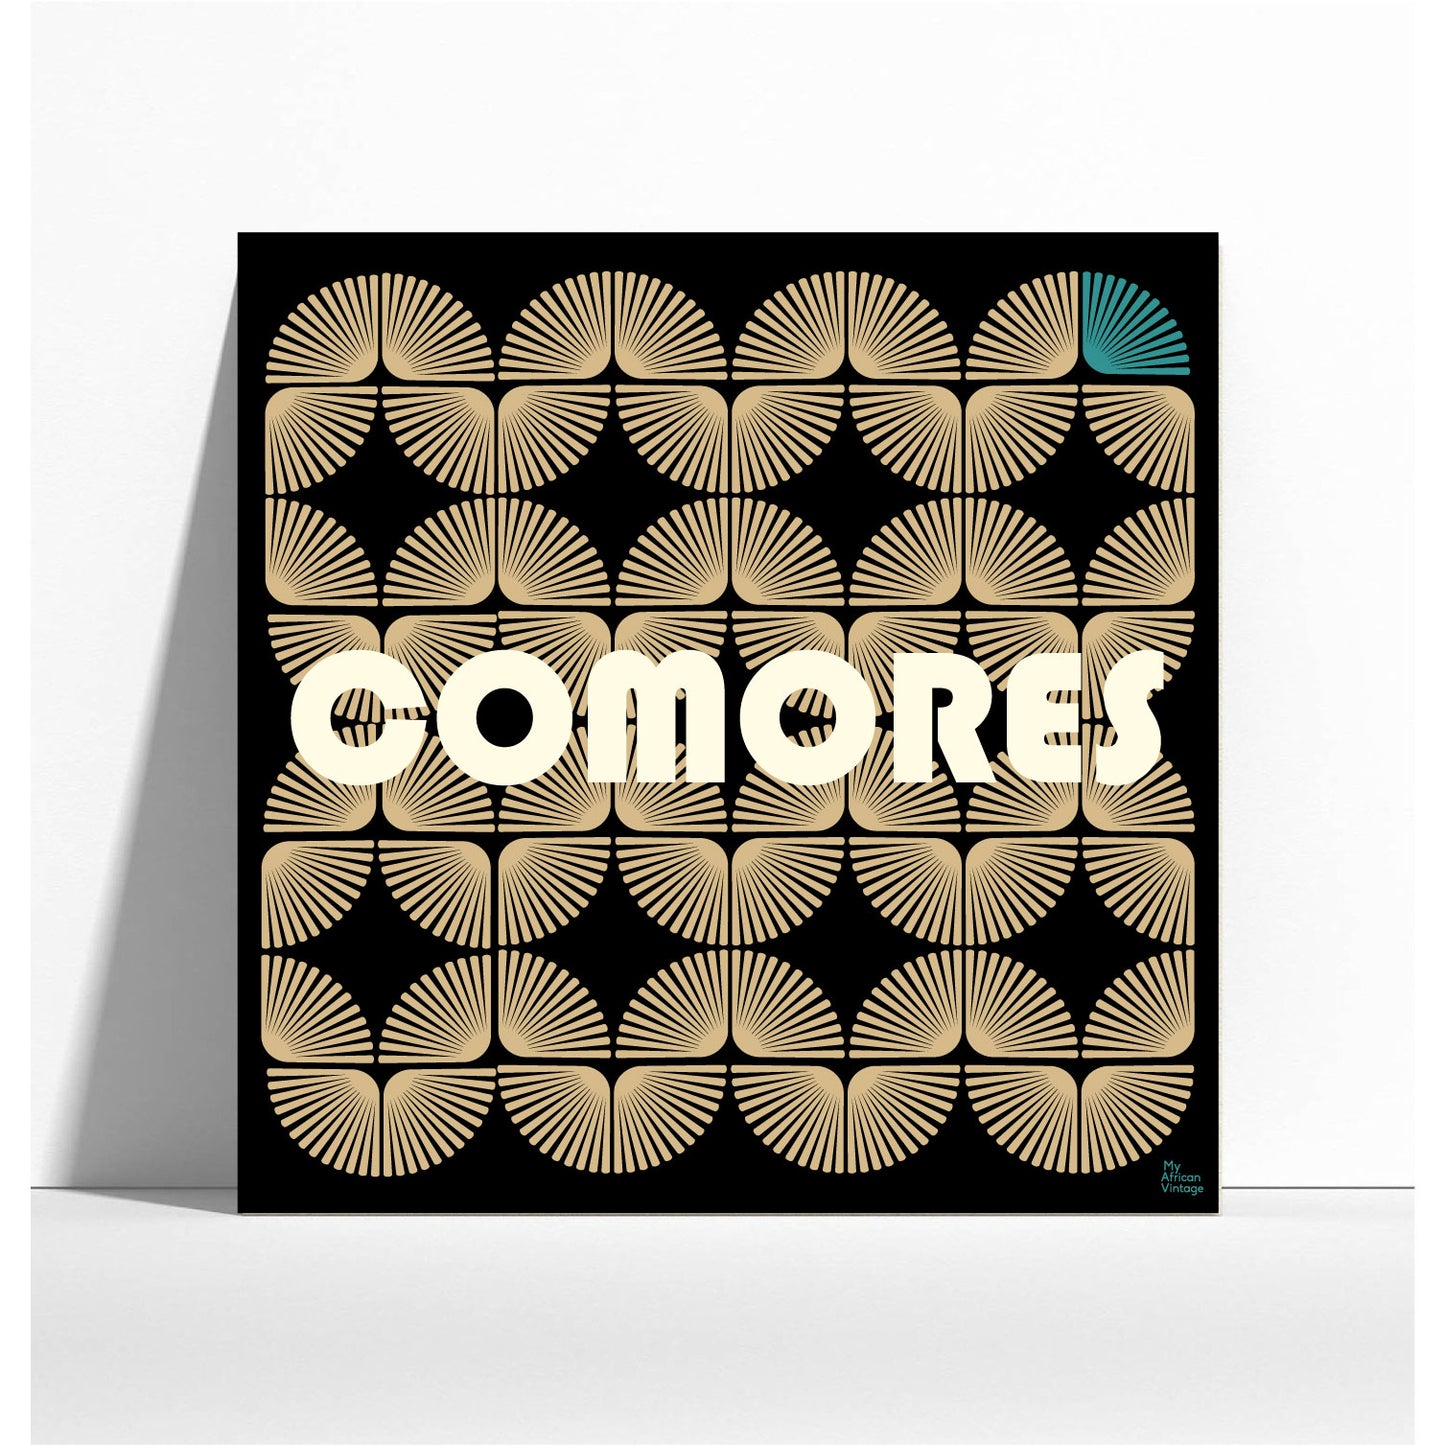 "Comoros" retro style poster -  "My African Vintage" collection